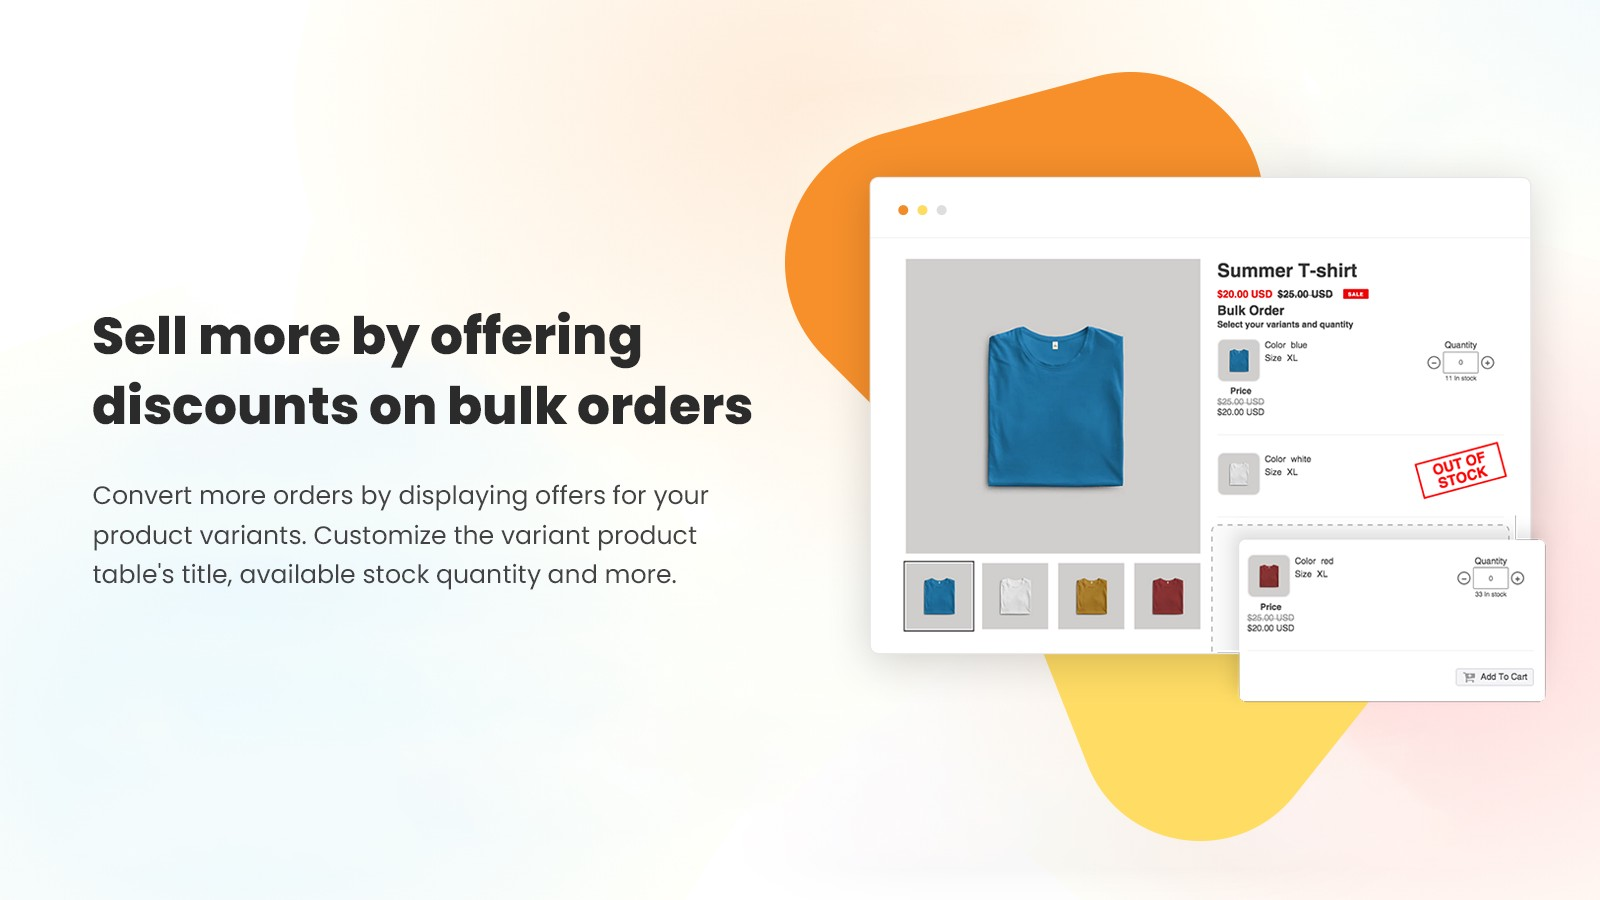 Sell more by offering discounts on bulk orders